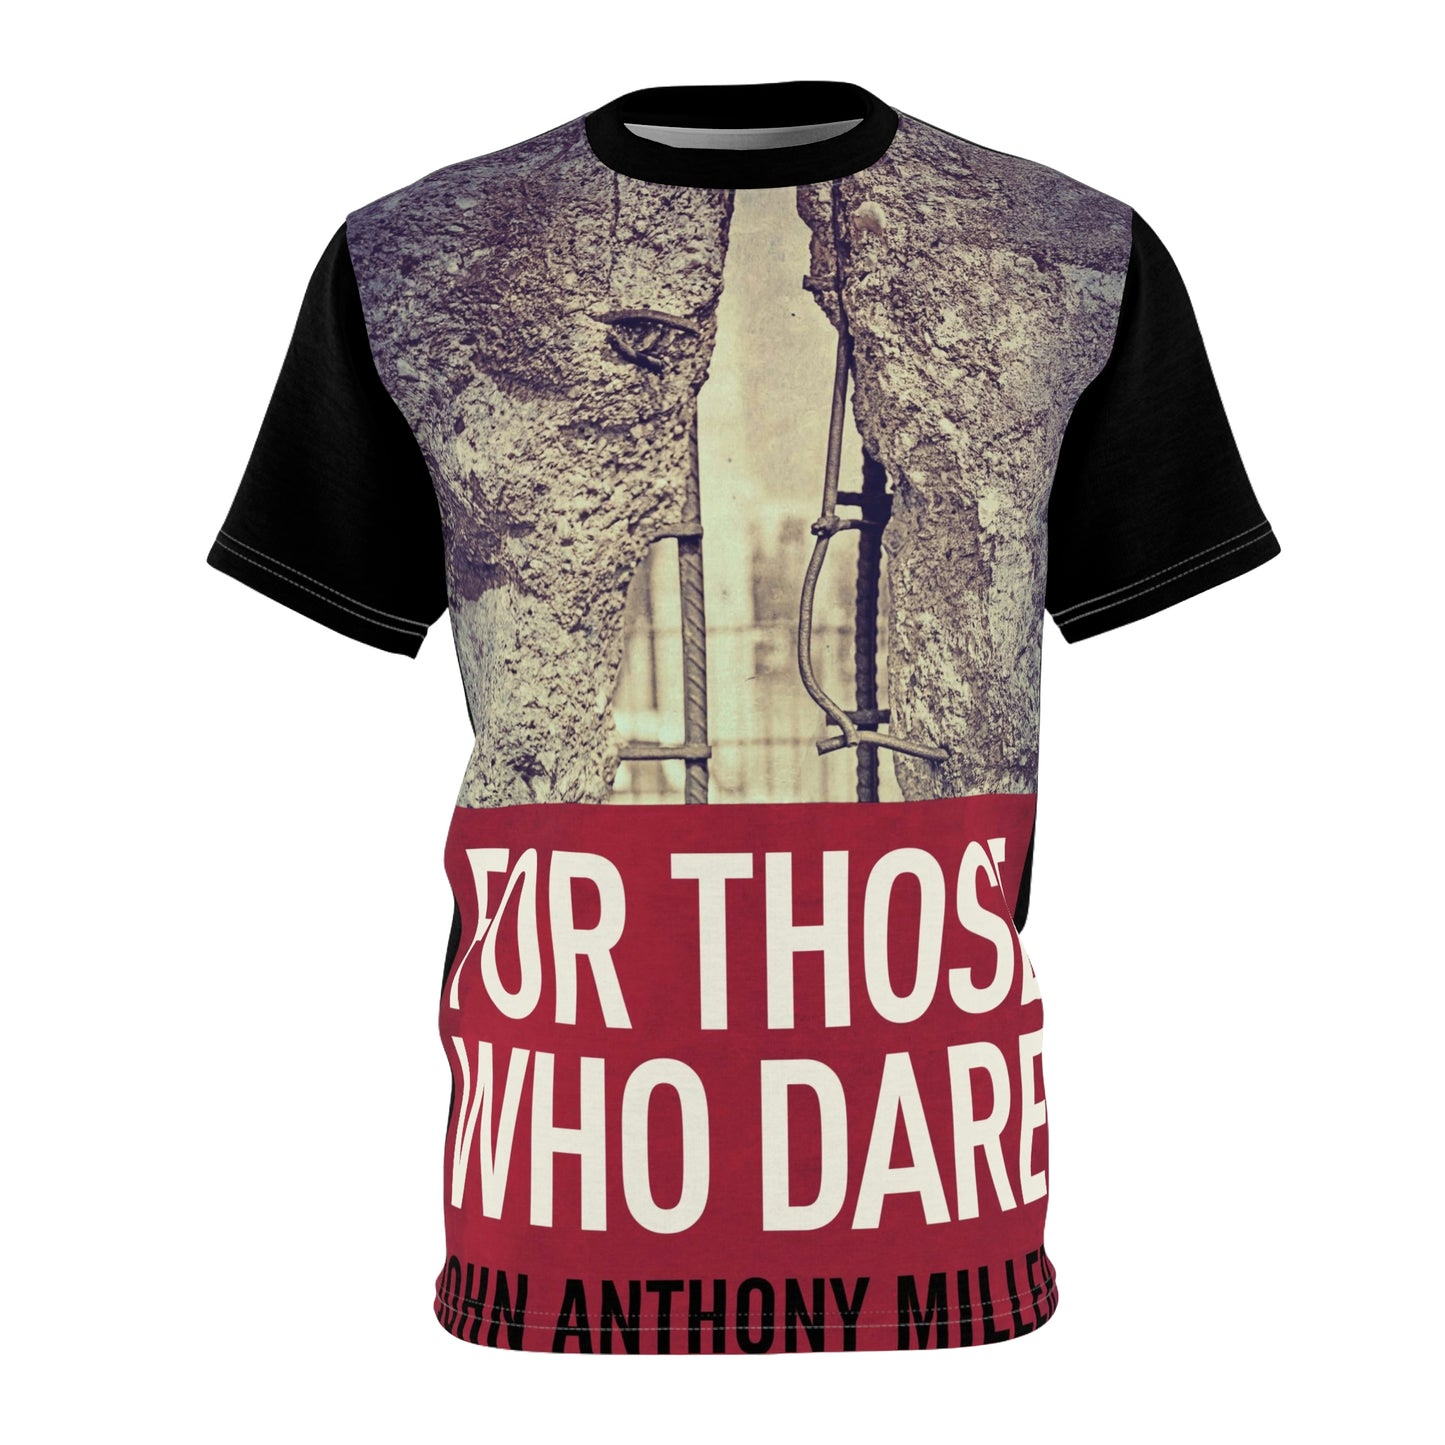 For Those Who Dare - Unisex All-Over Print Cut & Sew T-Shirt